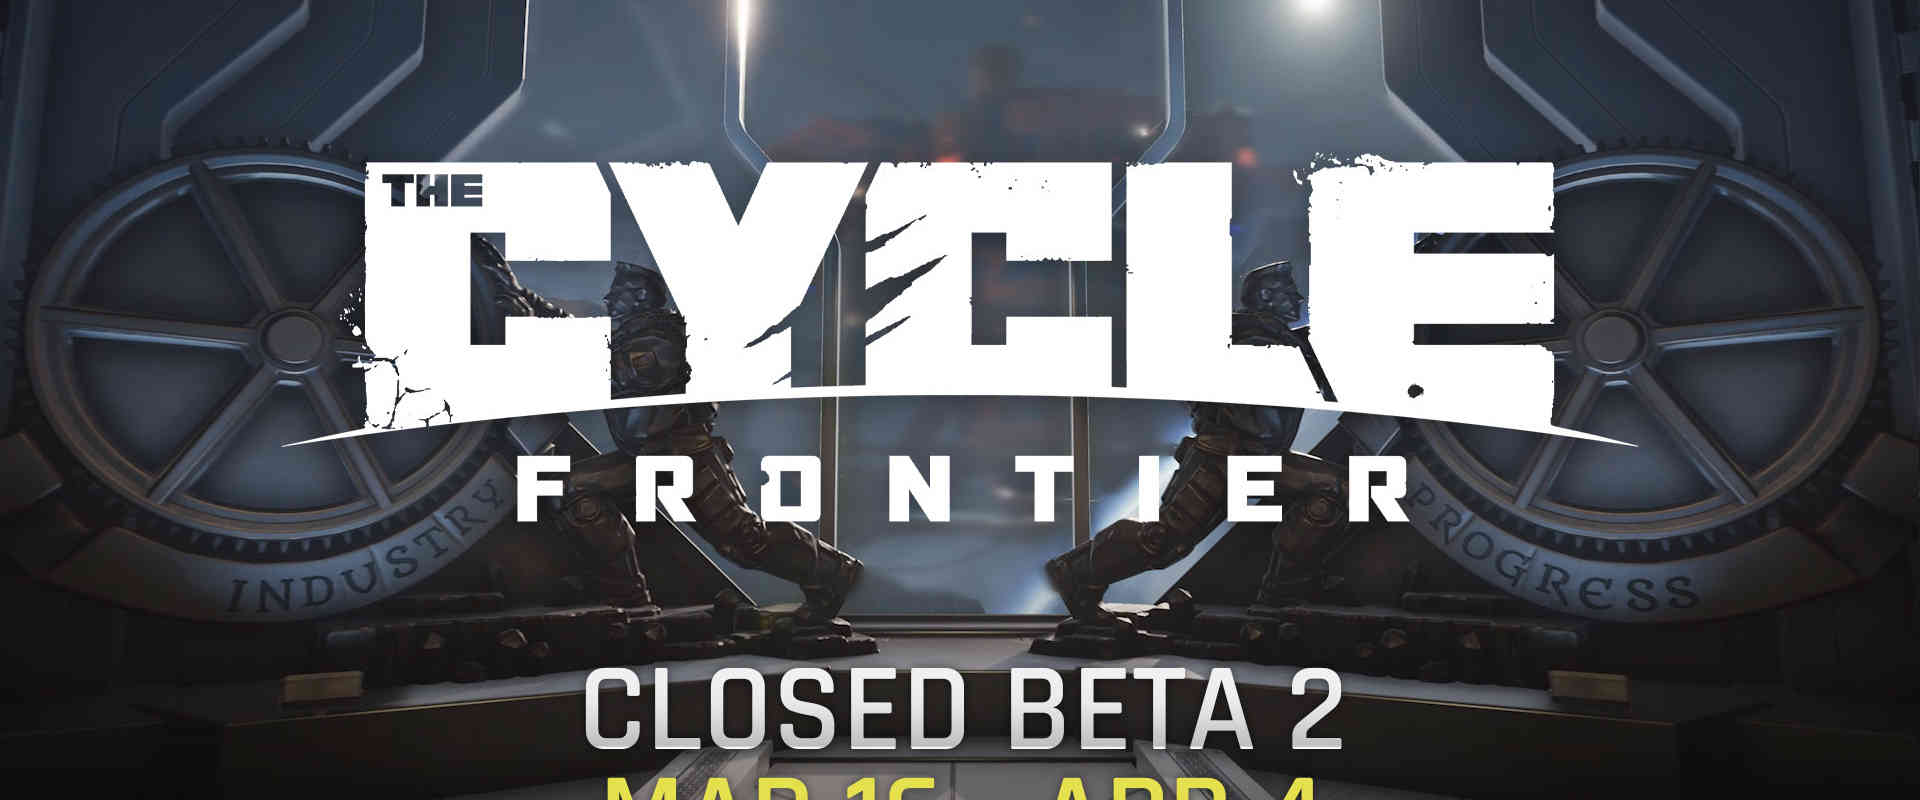 thecycle closed beta 2 delay